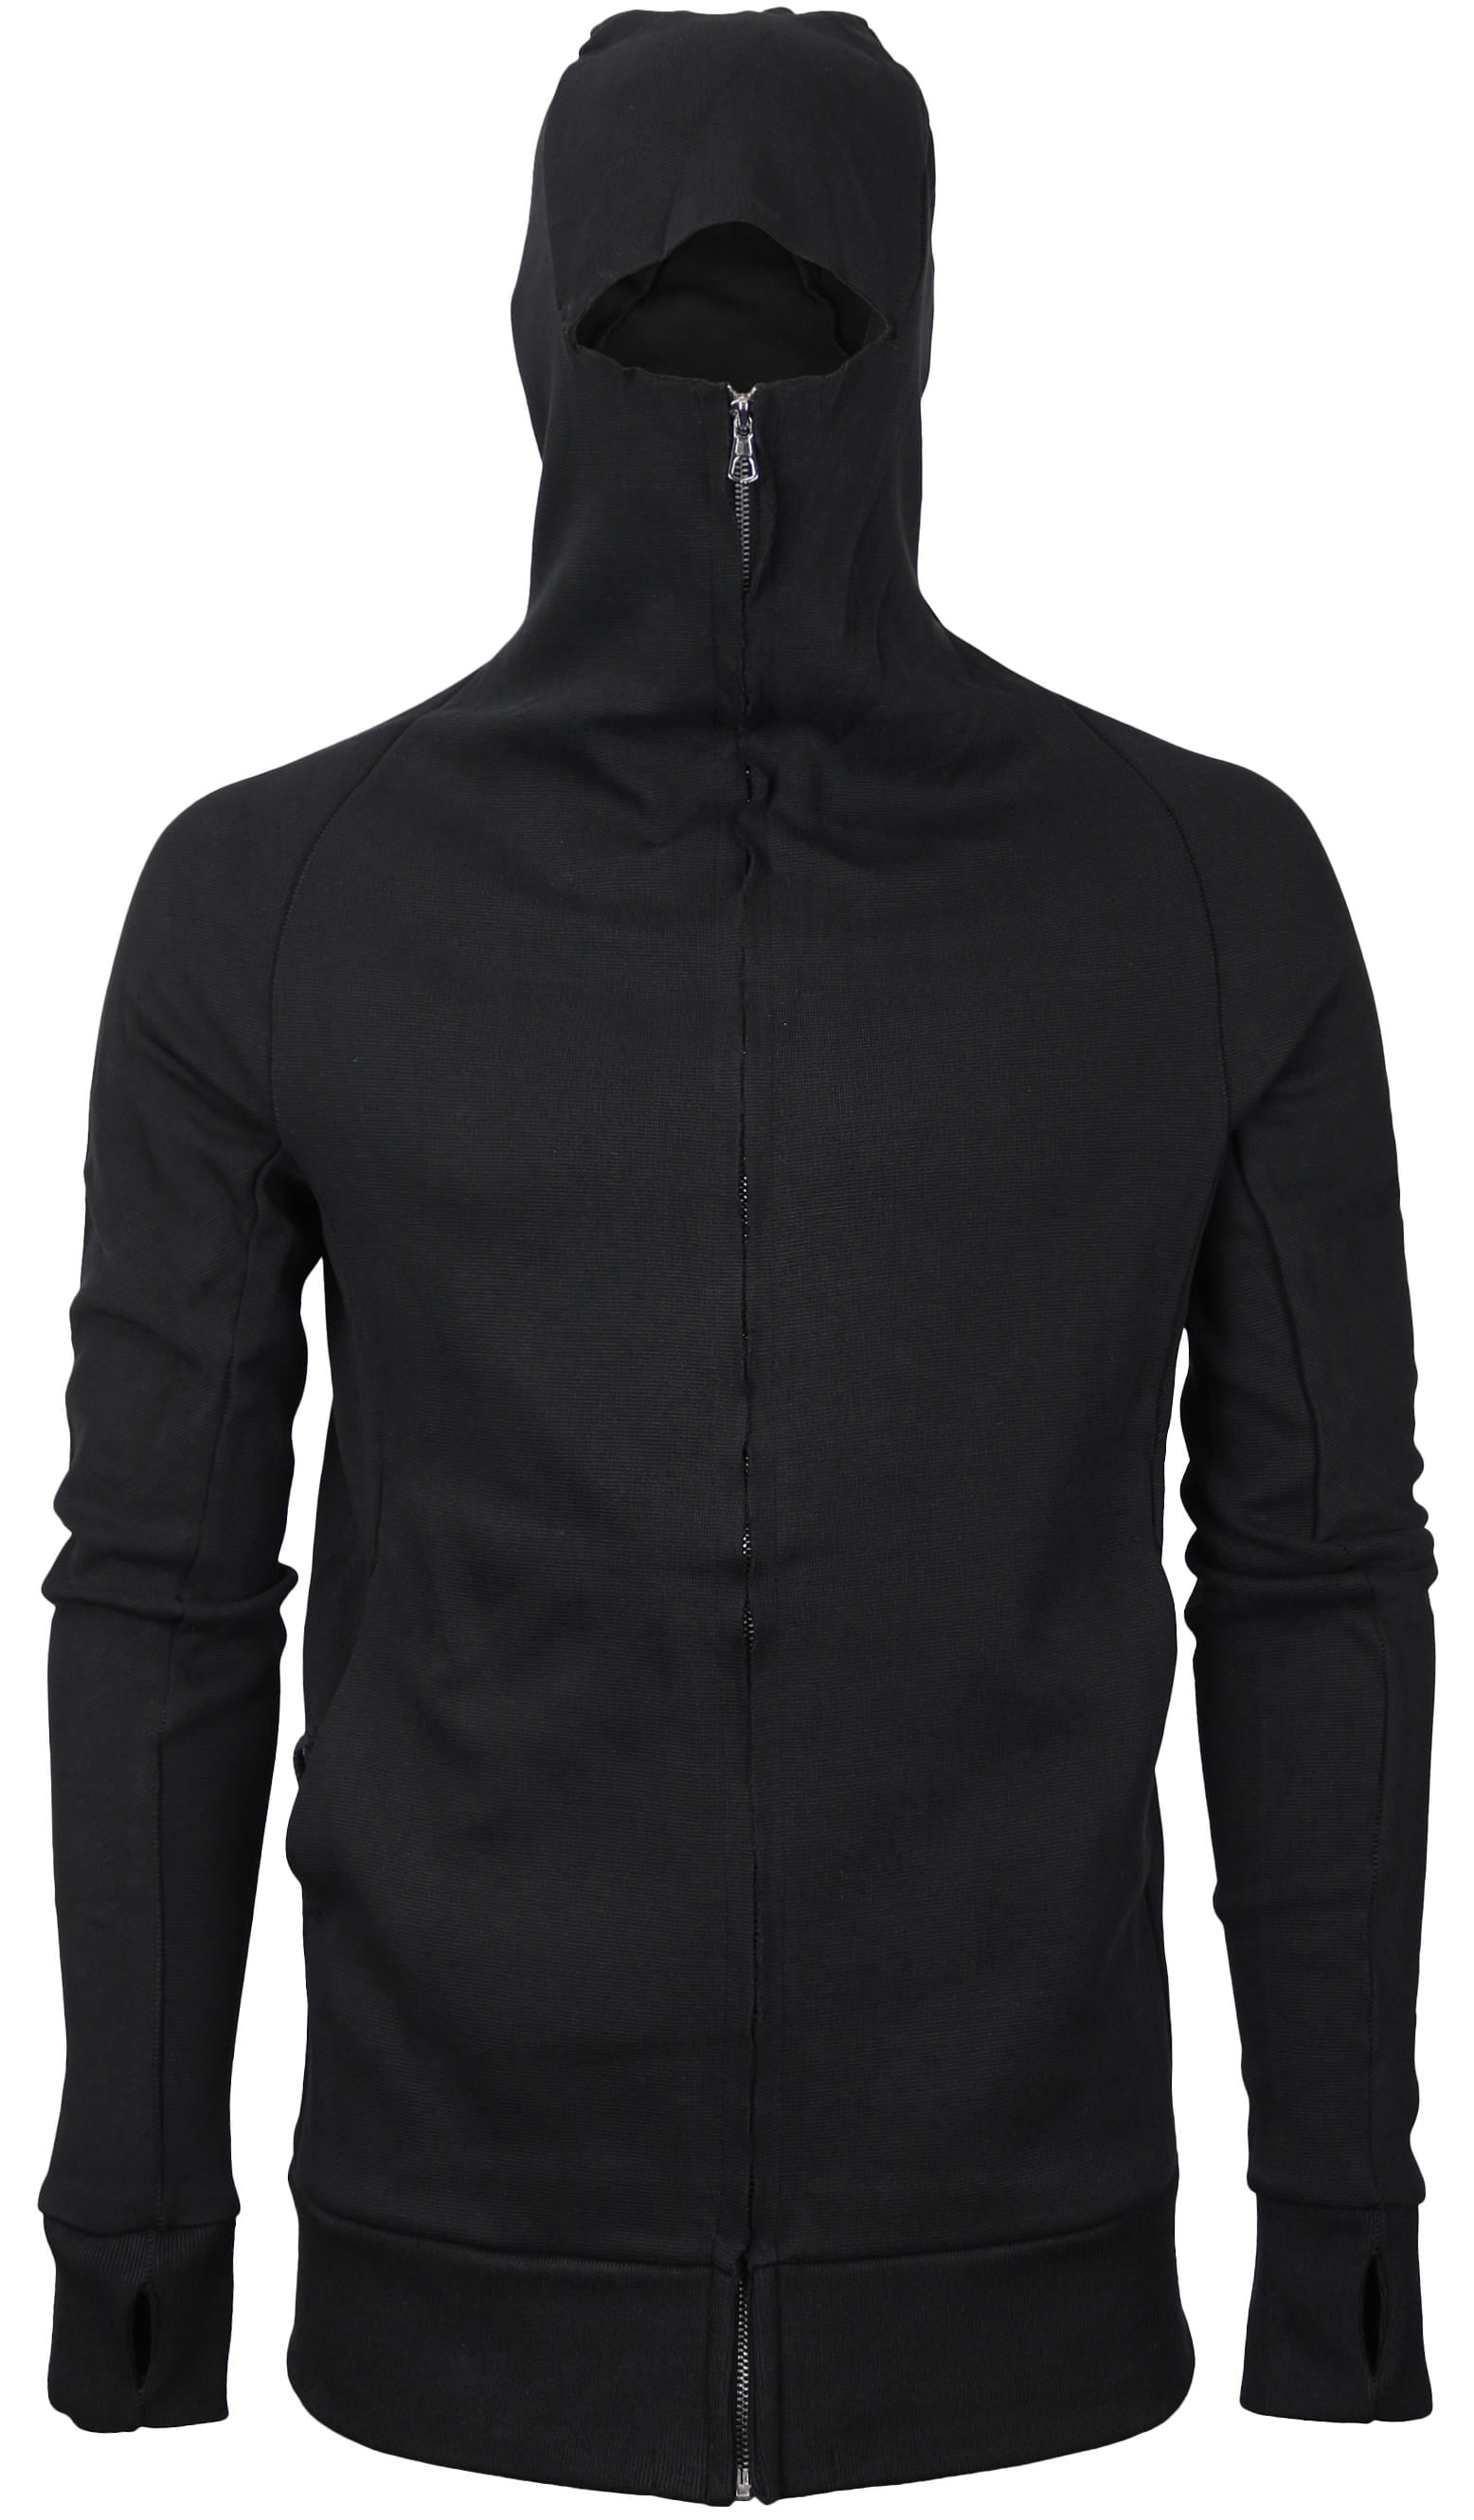 Branded, Stylish and Premium Quality Wholesale Thumb Hole Hoodie